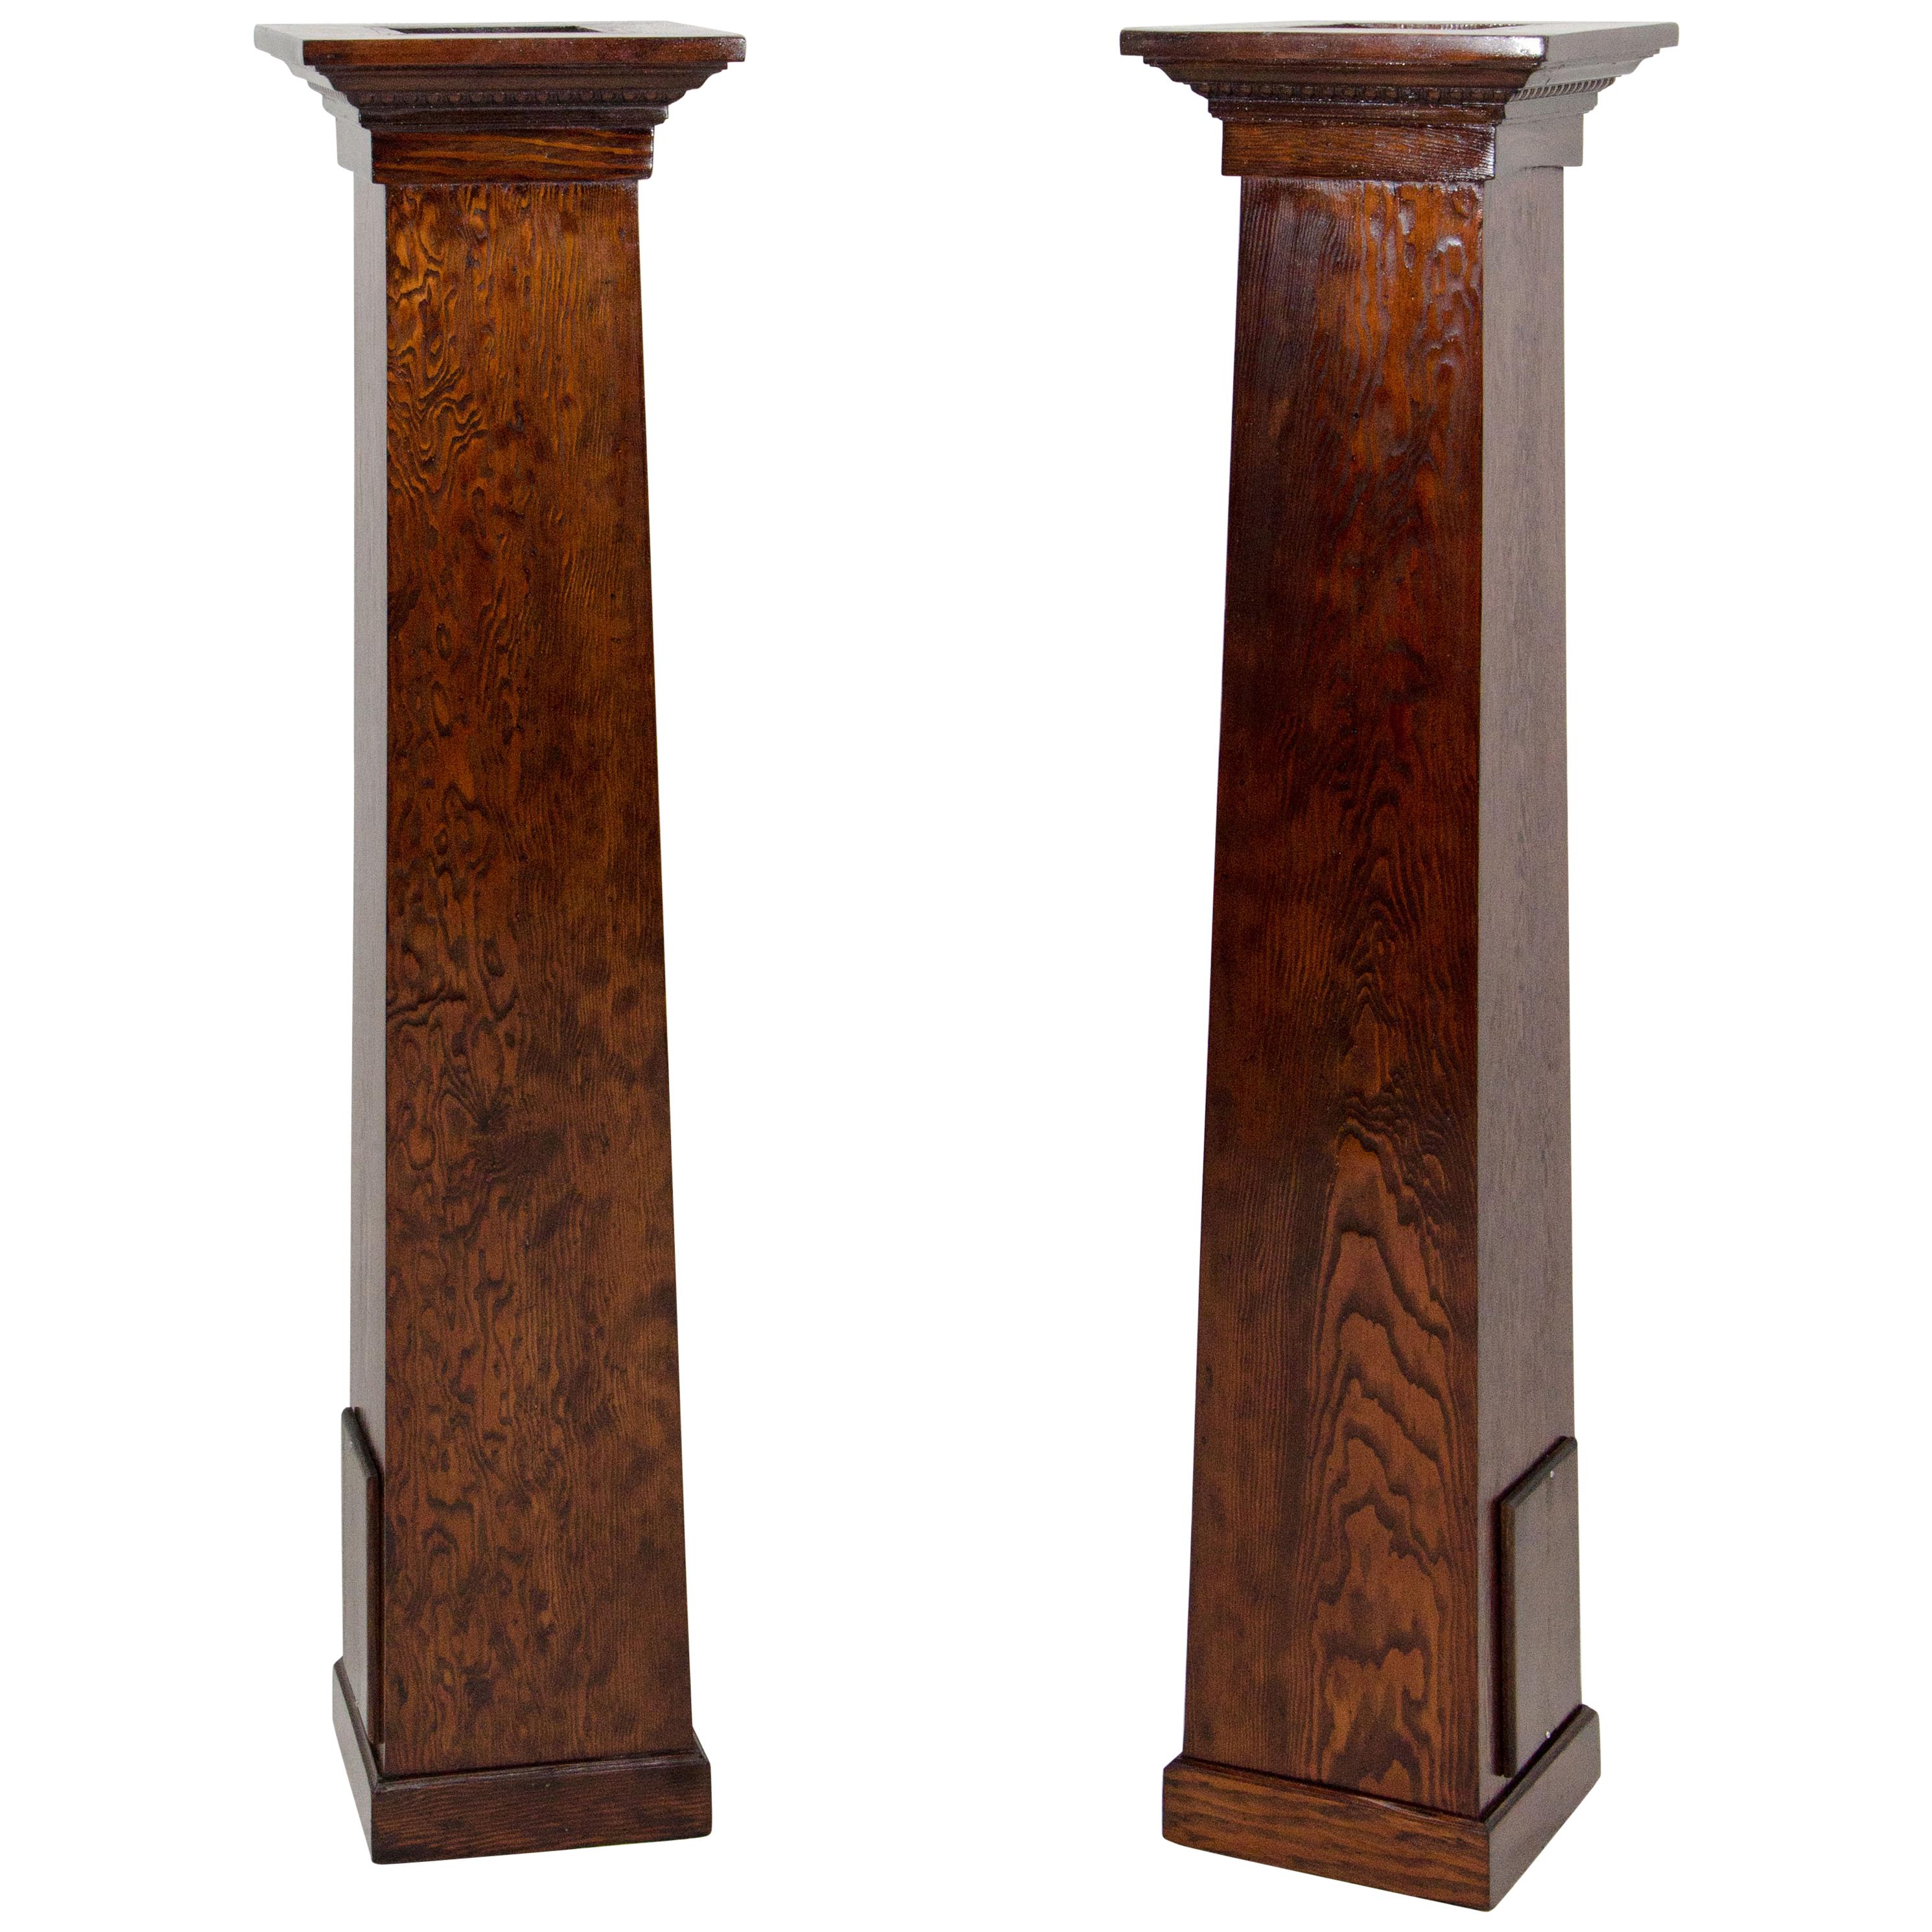 Pair of Fir Arts & Crafts Architectural Columns or Plant Stands